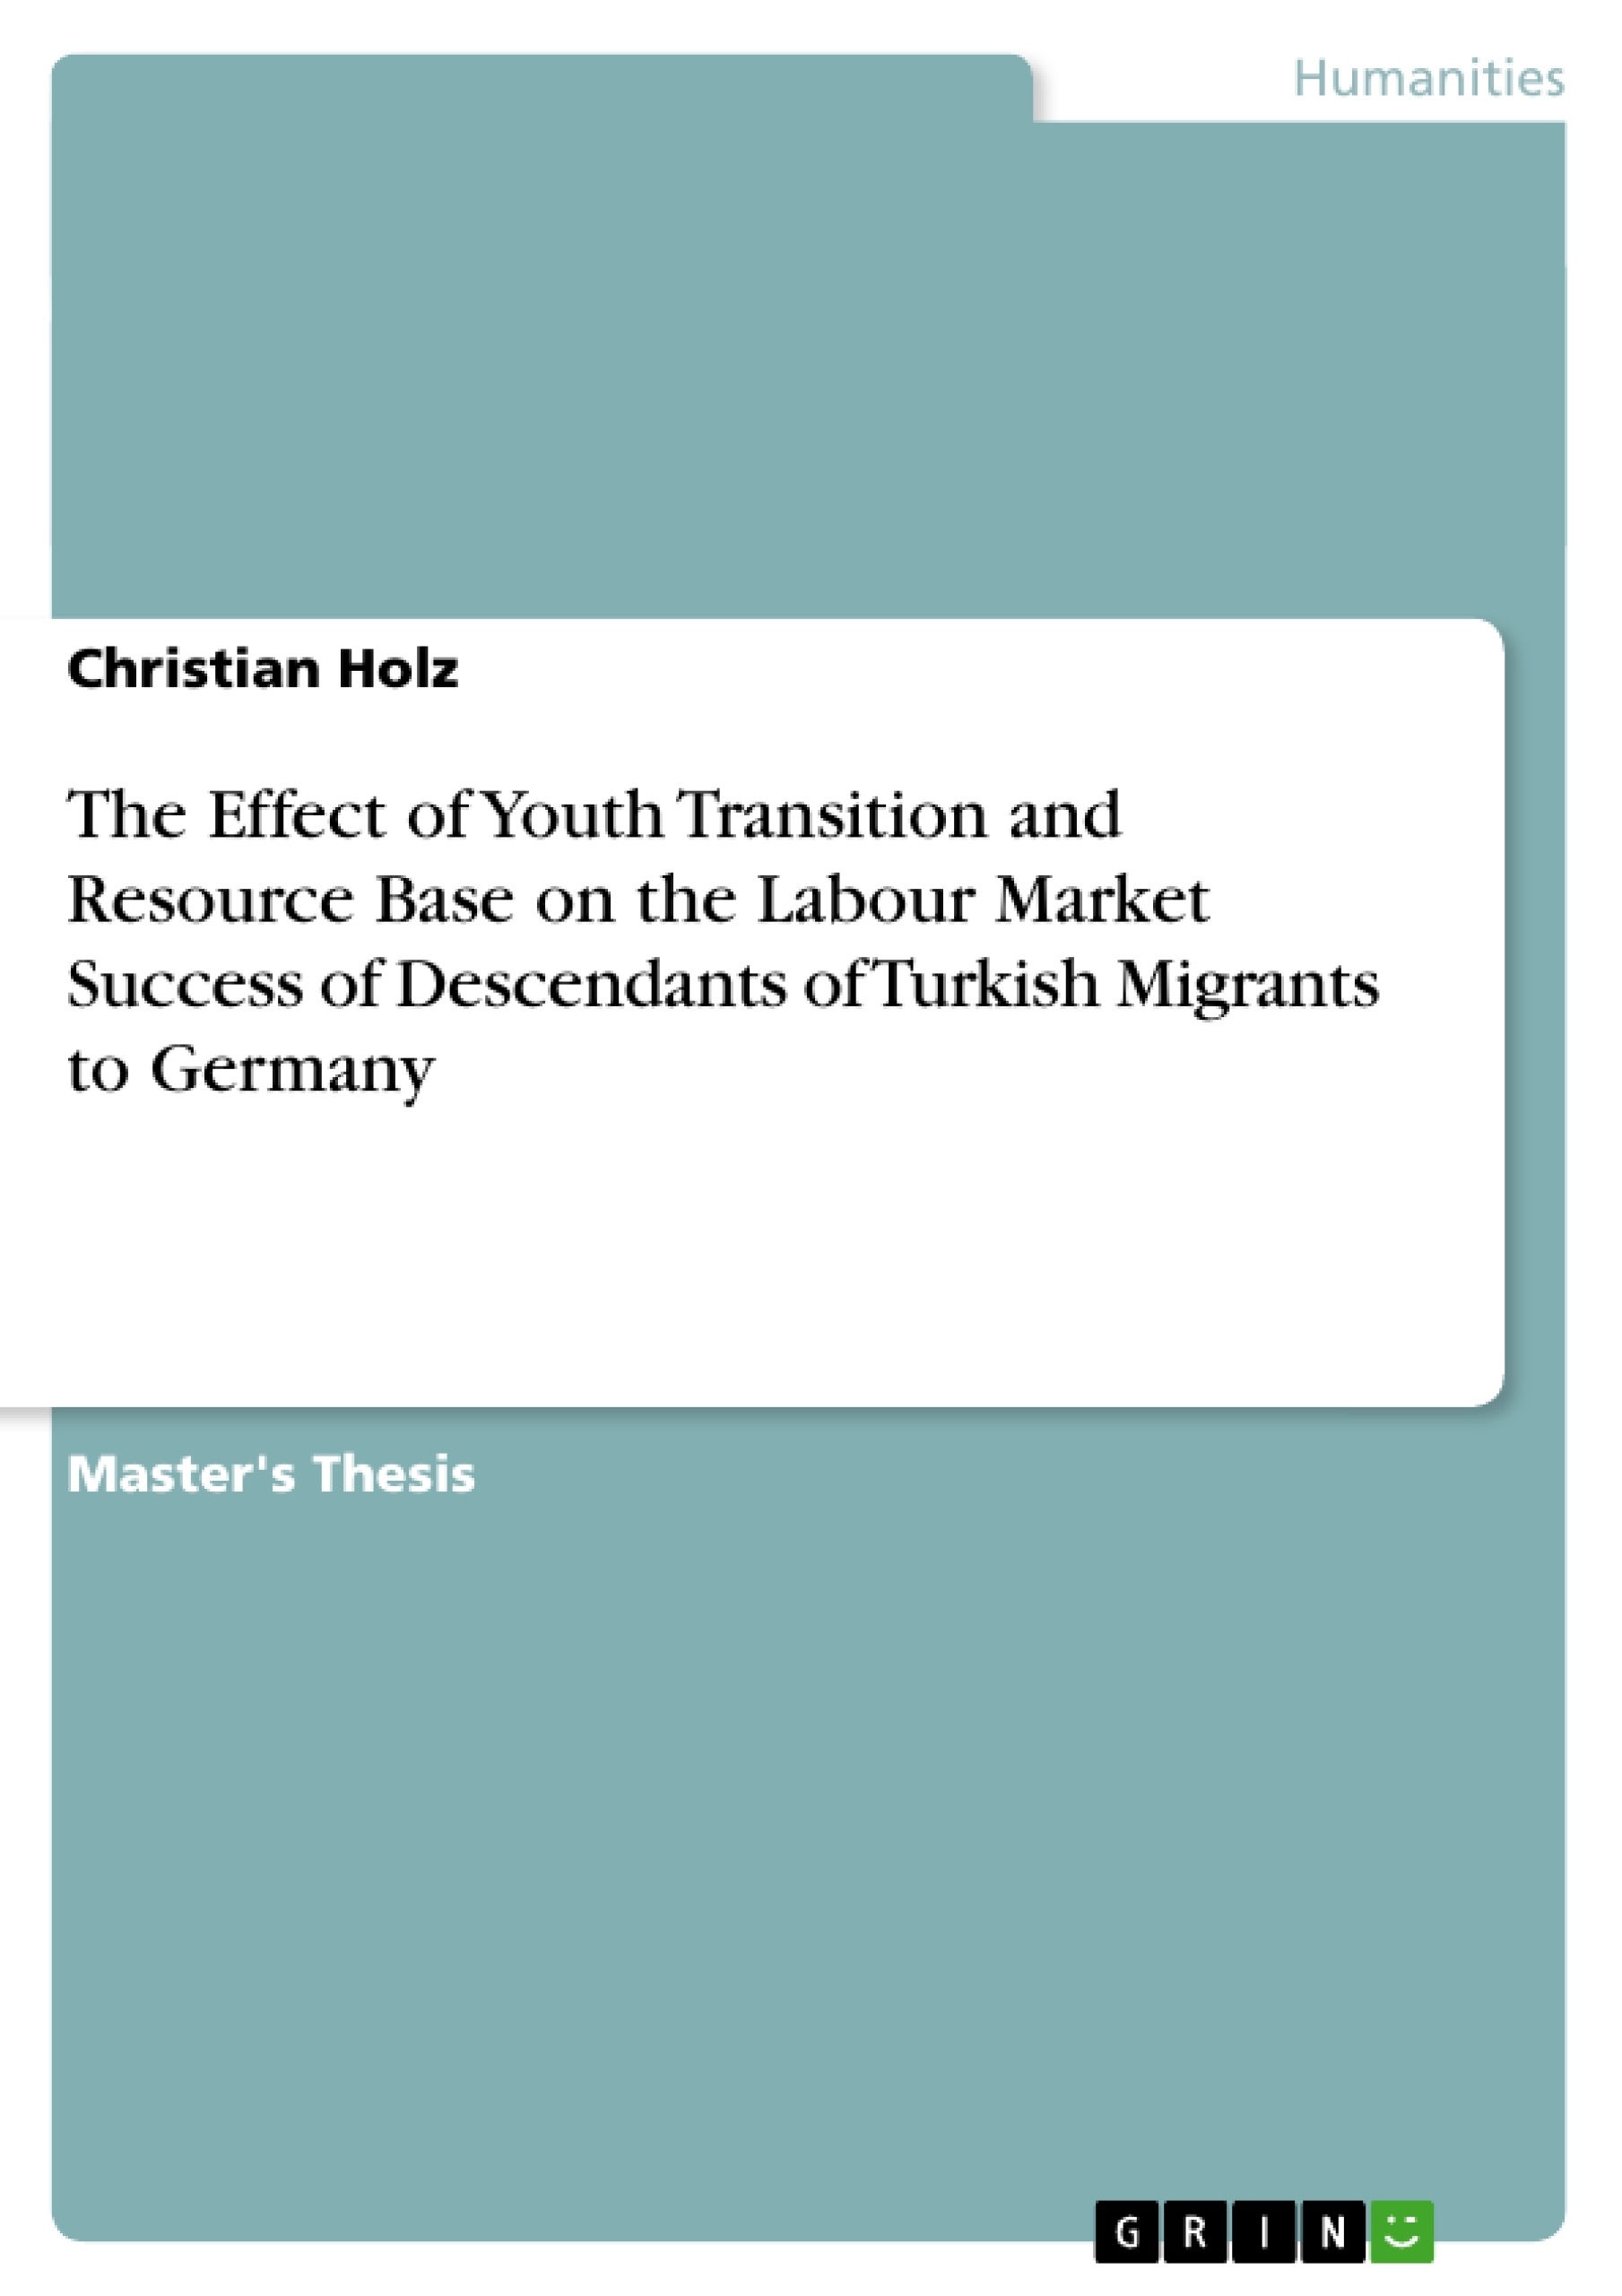 Title: The Effect of Youth Transition and Resource Base on the Labour Market Success of Descendants of Turkish Migrants to Germany